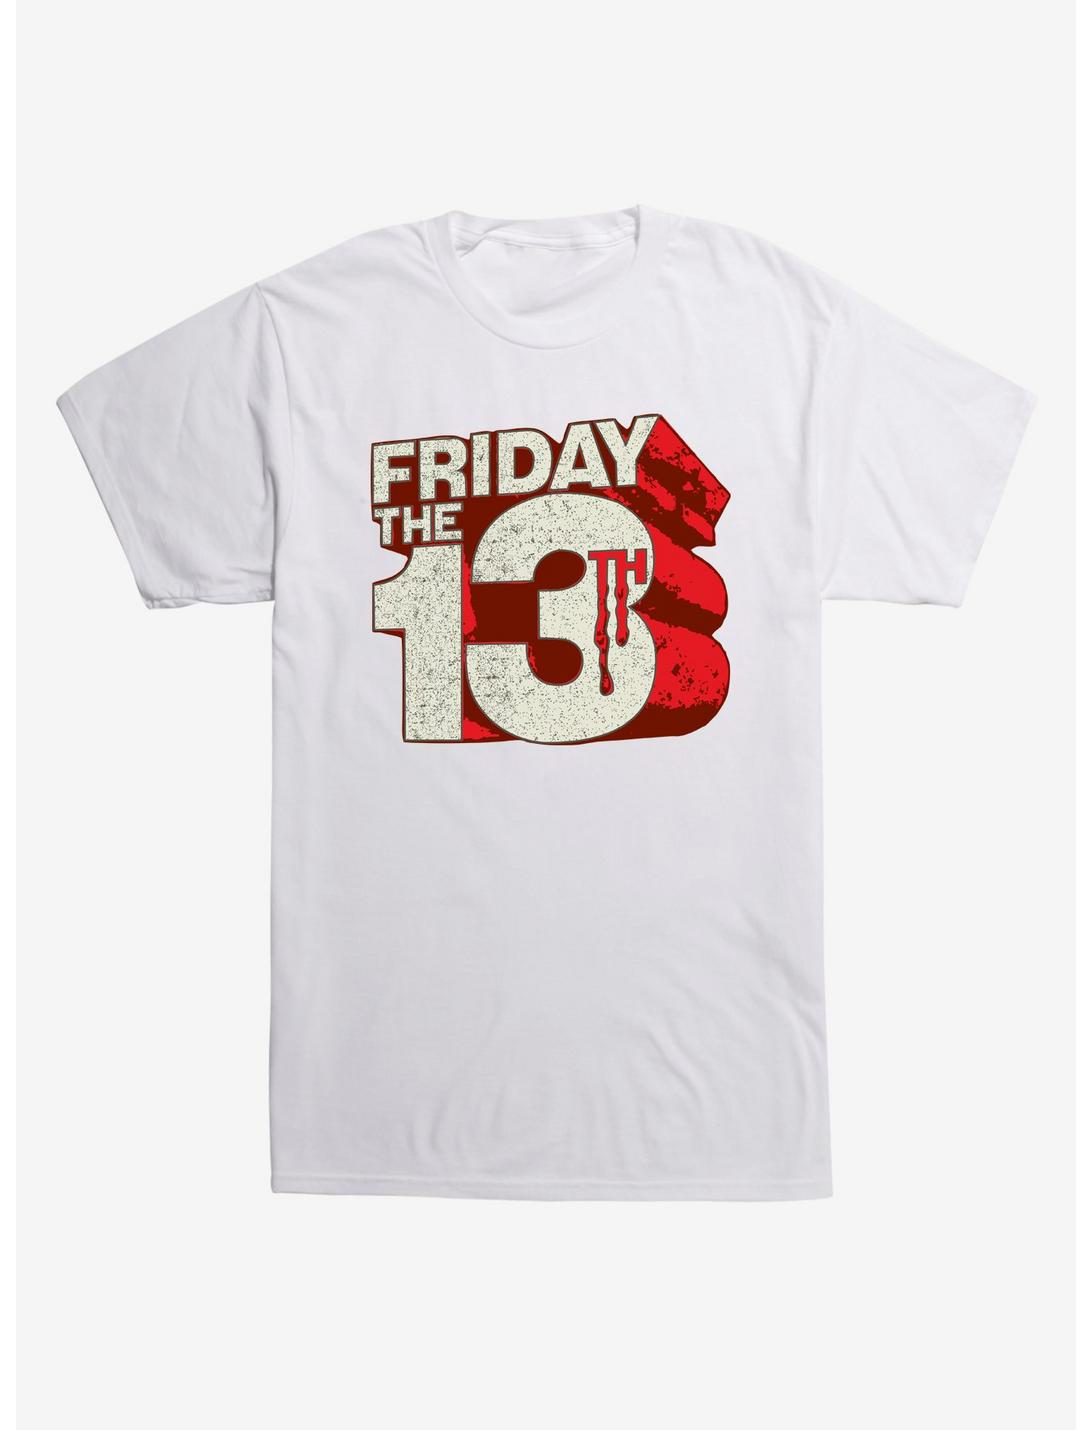 Friday the 13th Friday the 13th T-Shirt, WHITE, hi-res